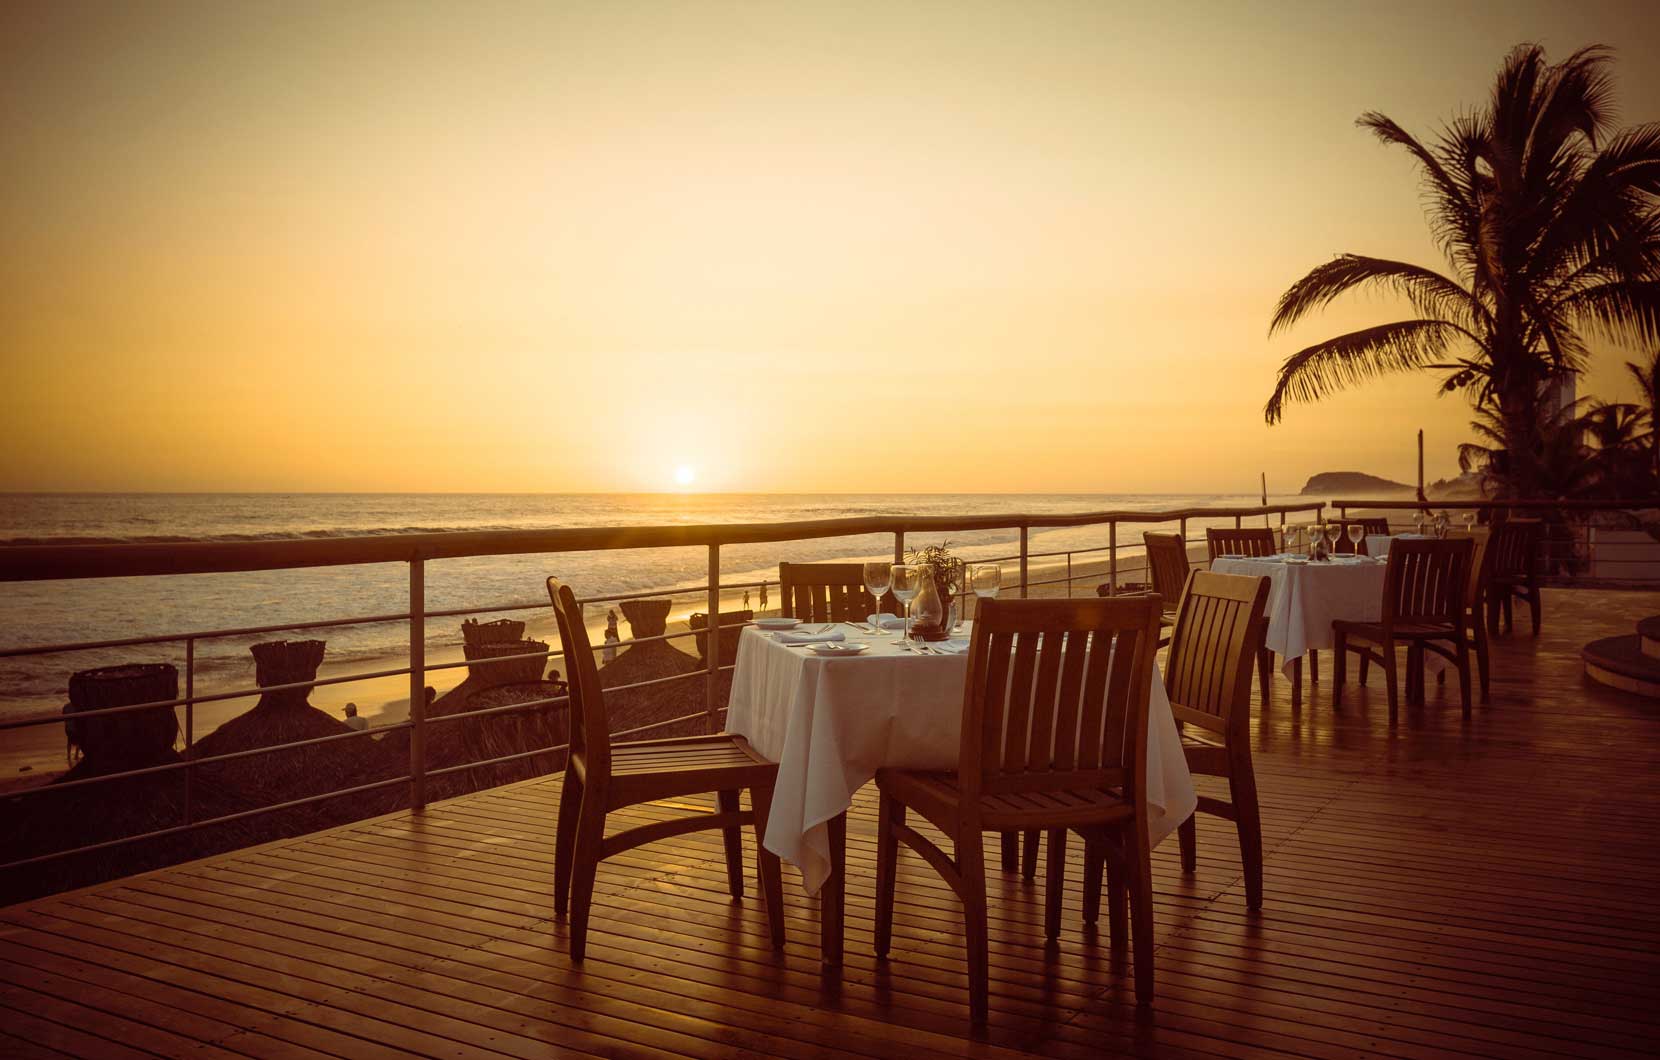 Sunset Bar is the best place to enjoy a delicious drink and a magnificent sunset.